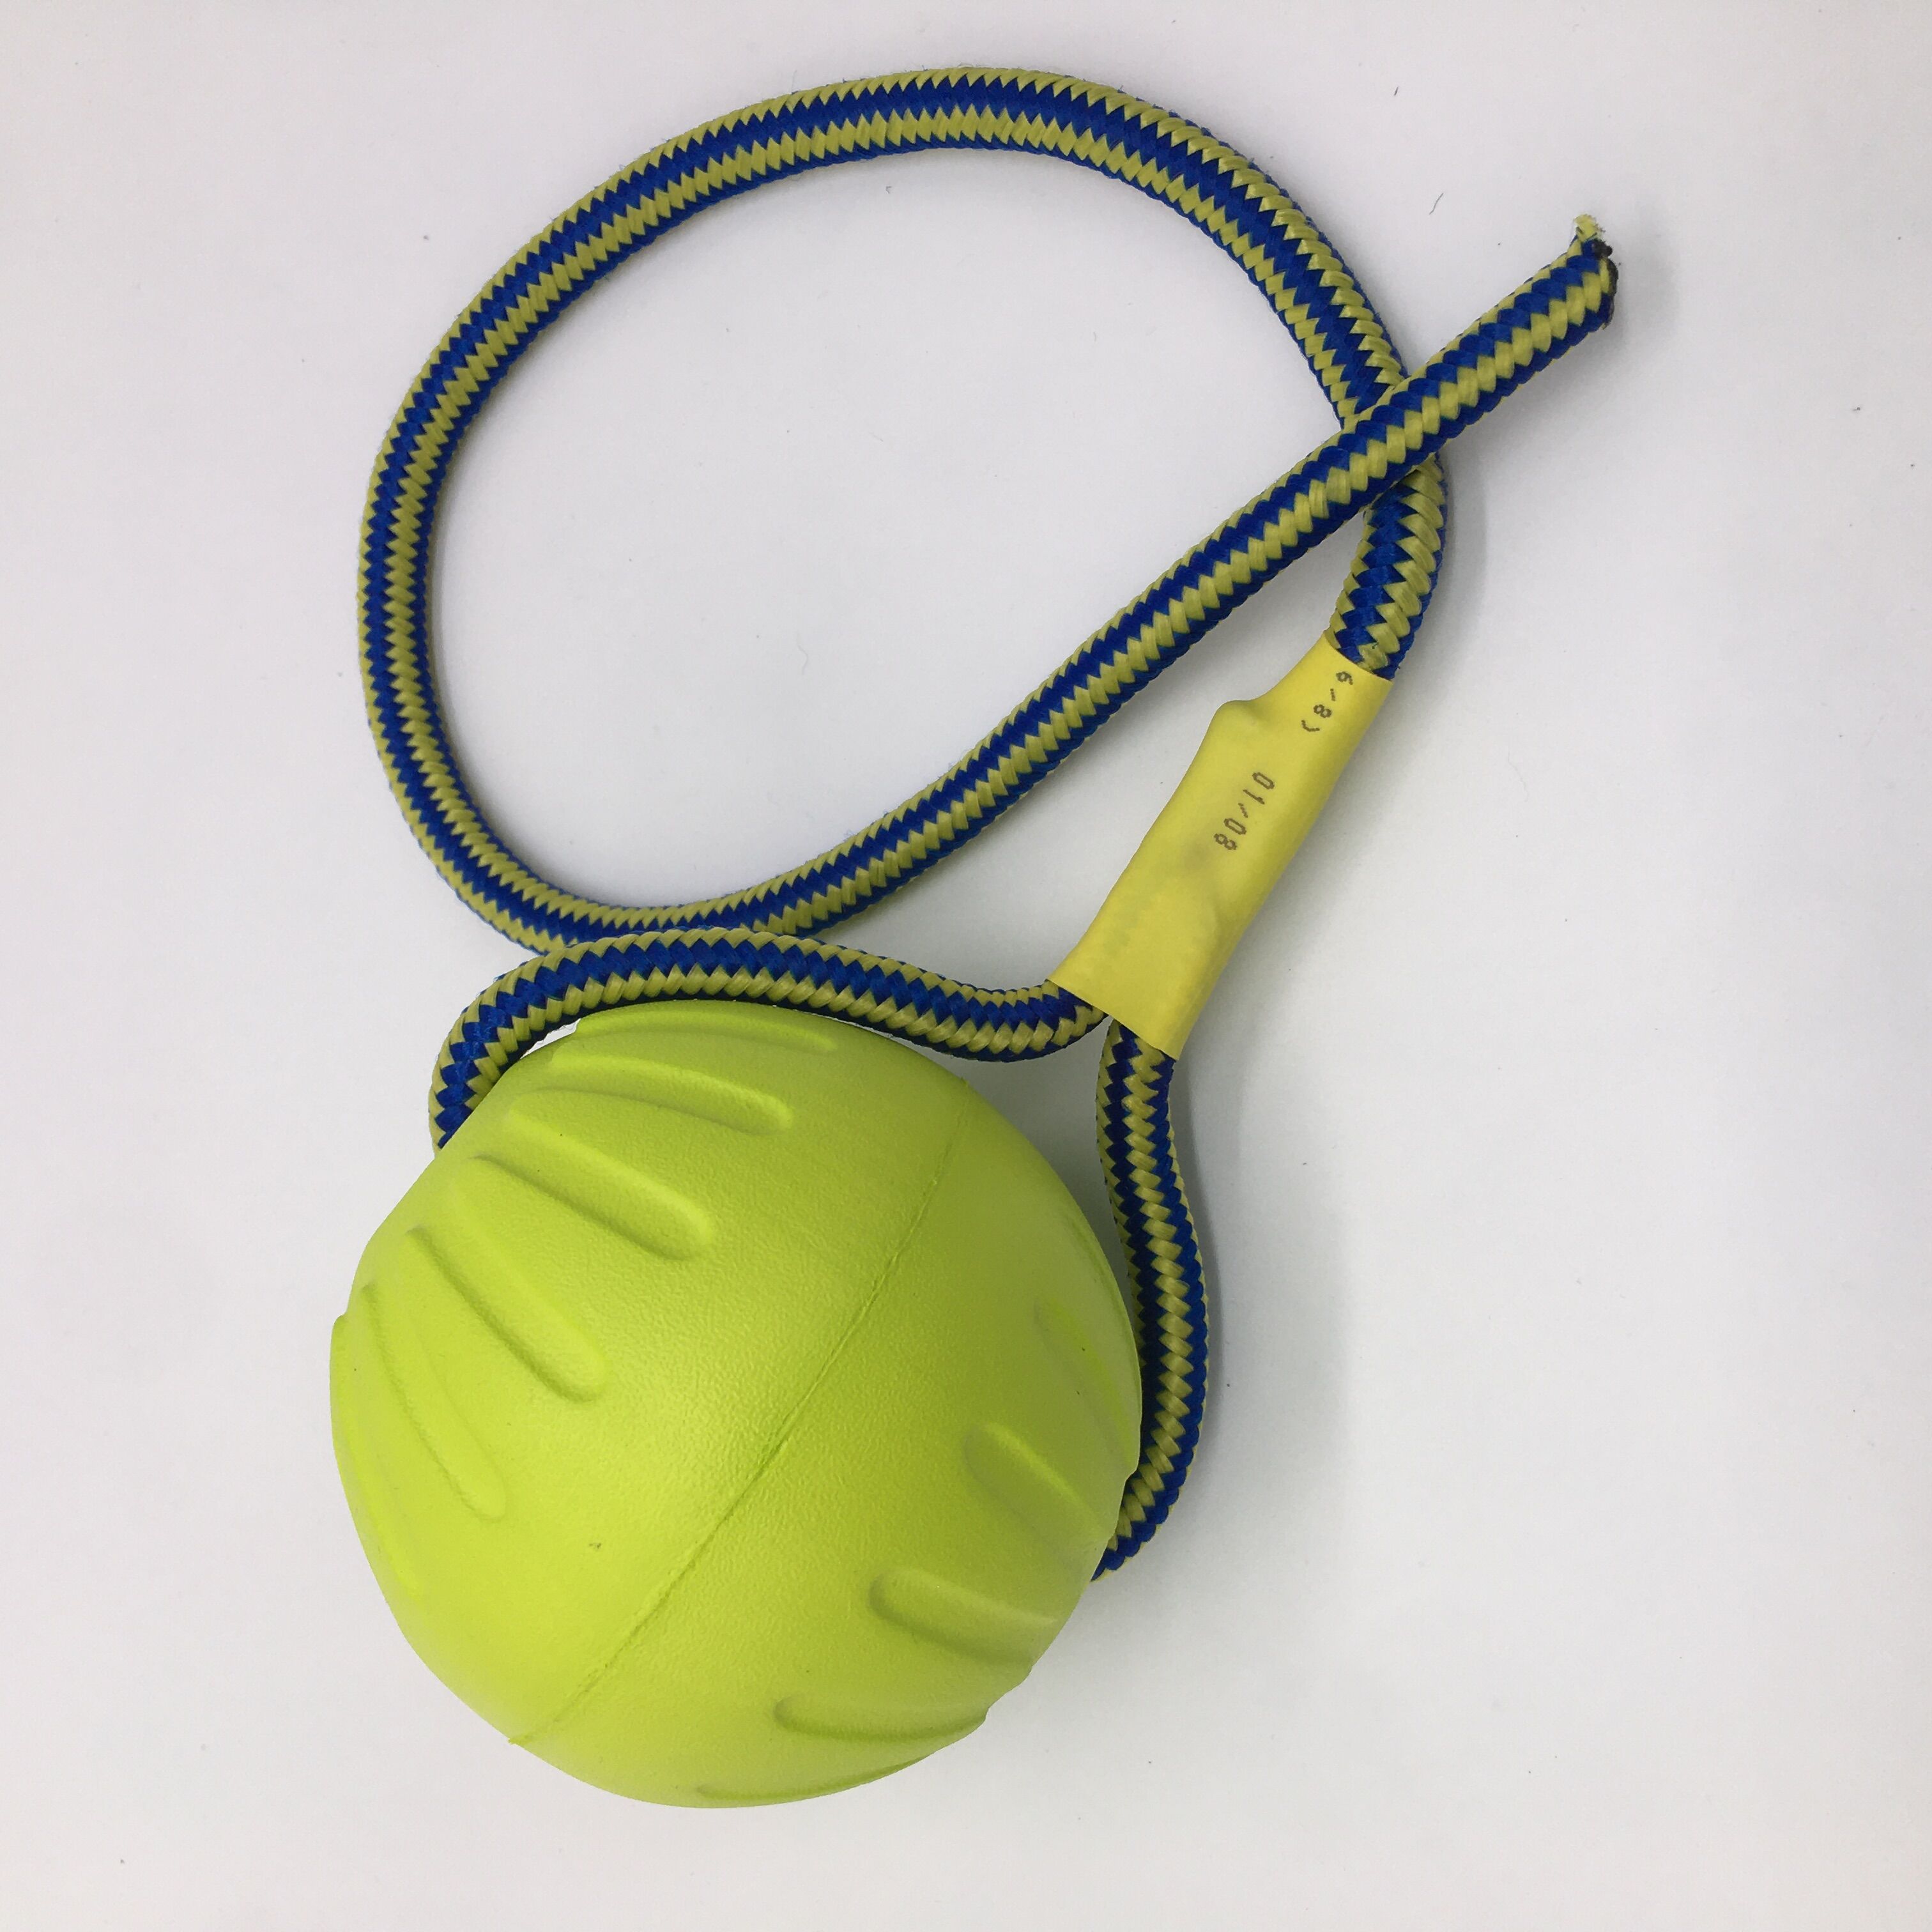 QBLEEV Interactive Dog Ball Toys with Chew Rope, Dog Chew Balls